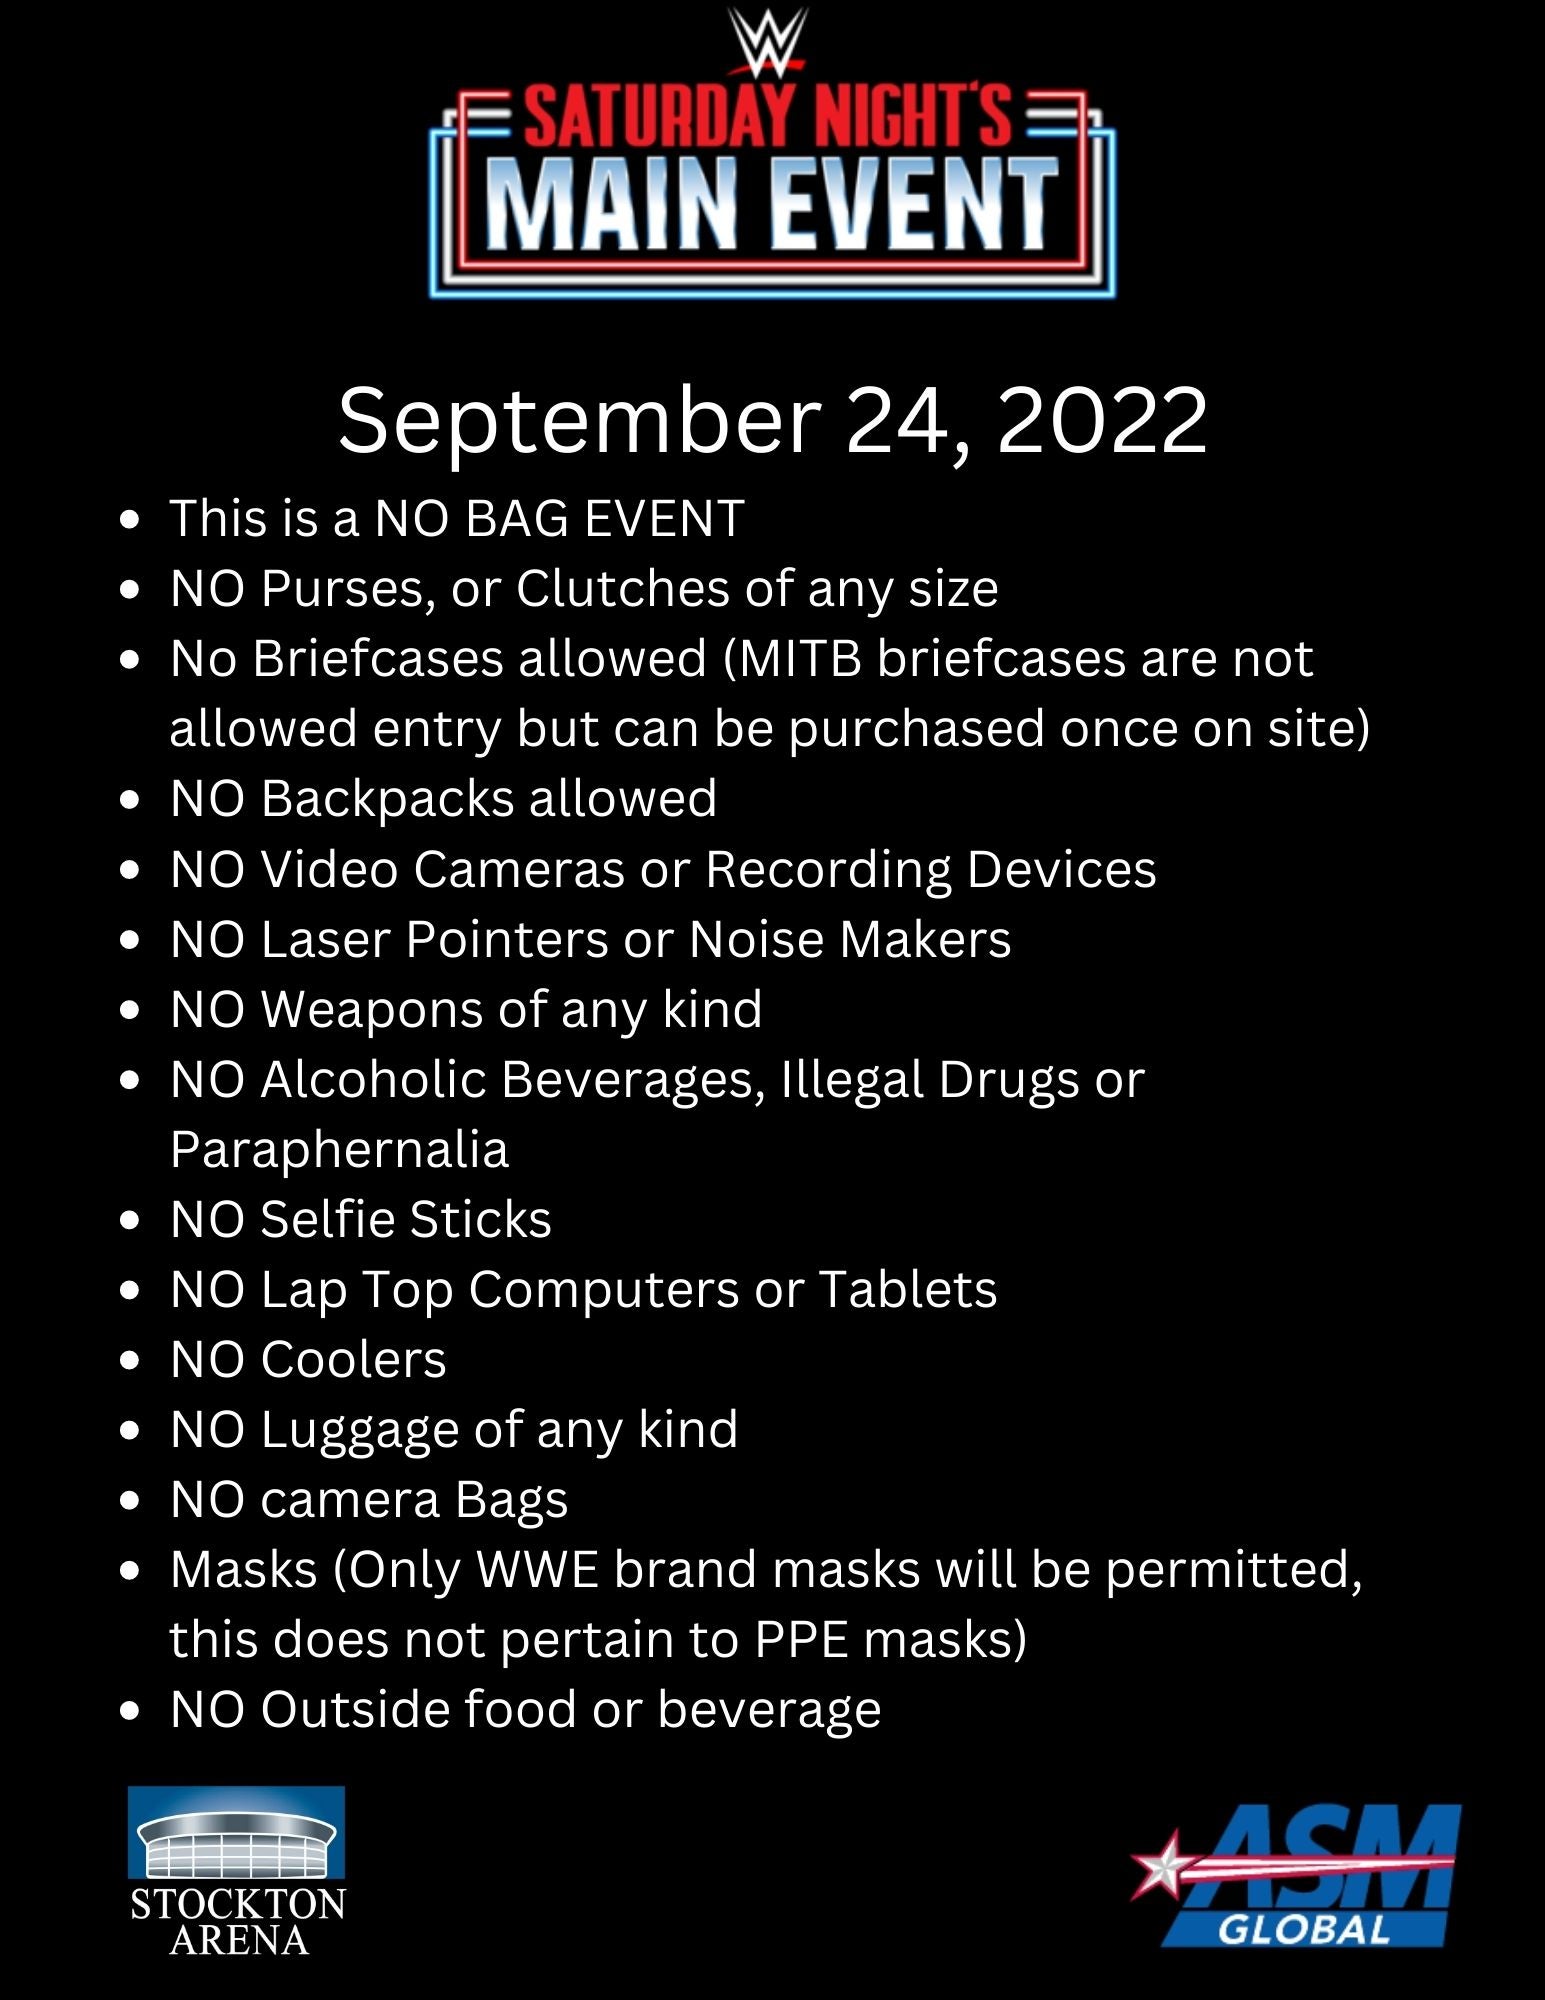 This is a NO BAG EVENT No Briefcases ALLOWED NO Backpacks ALLOWED Video Cameras or Recording Devices Laser Pointers or Noise Makers NO Weapons of any kind NO Alcoholic Beverages, Illegal Drugs or Paraphernal (1).jpg